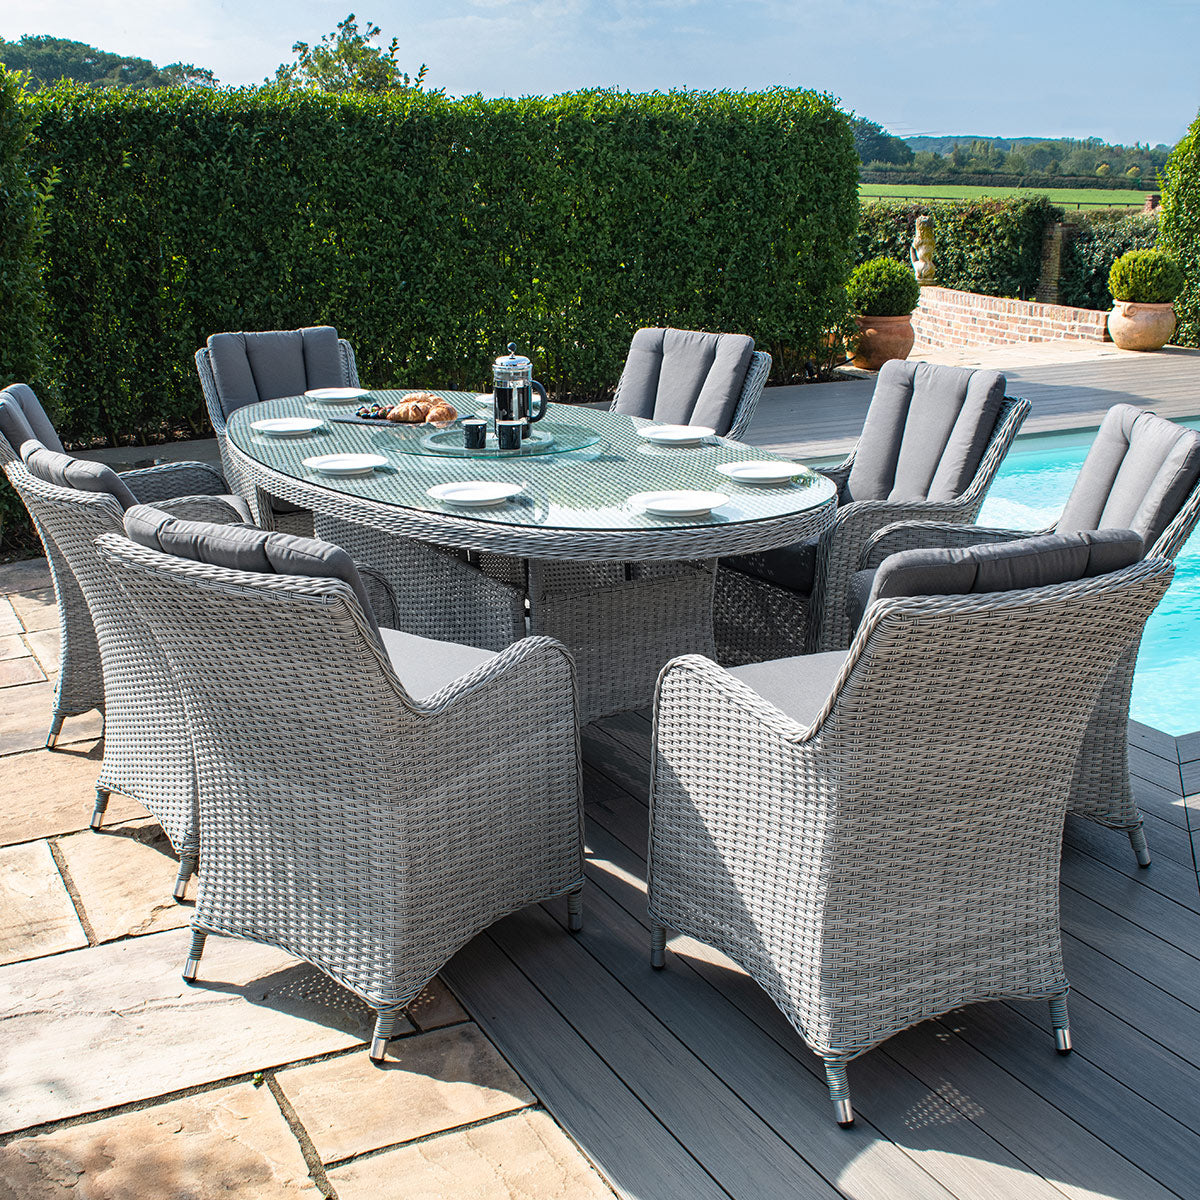 Maze - Ascot 8 Seat Oval Rattan Dining Set with Lazy Susan & Weatherproof Cushions